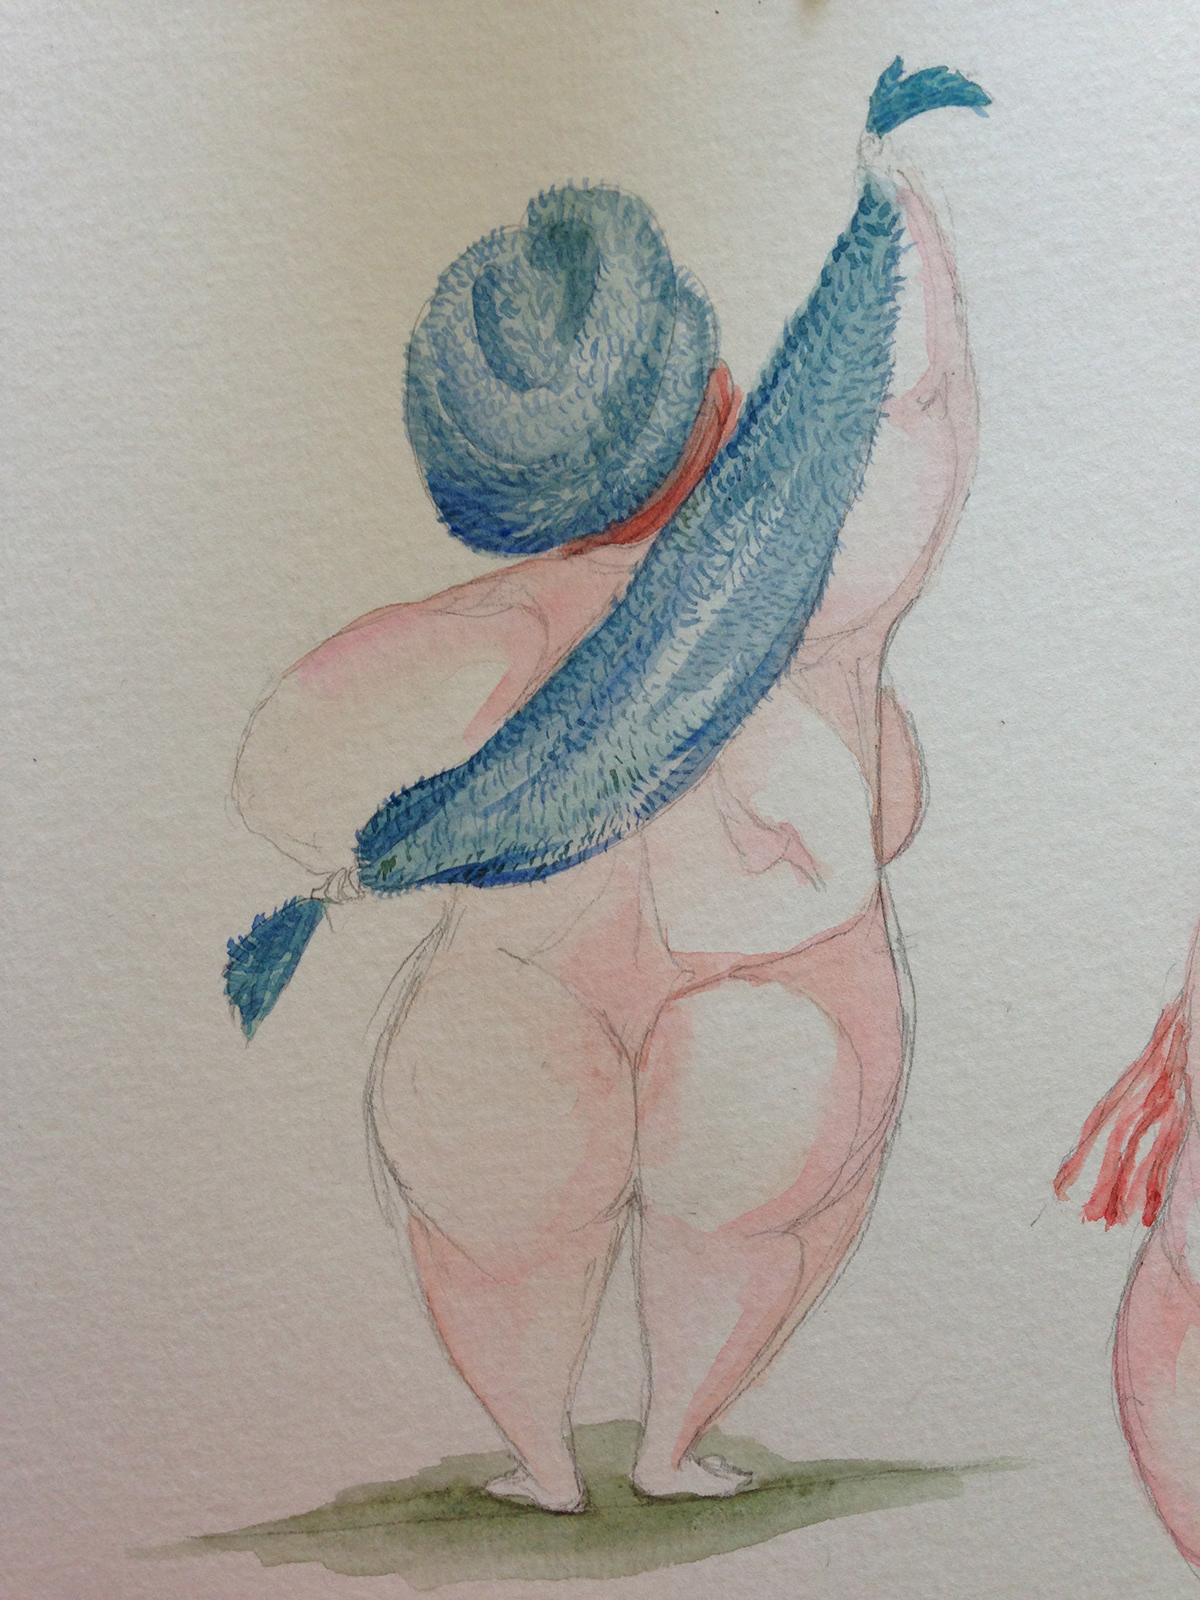 fat  lady  WOMAN  women  girl  chubby  voluptuous soft feminine watercolor rough paper textured color